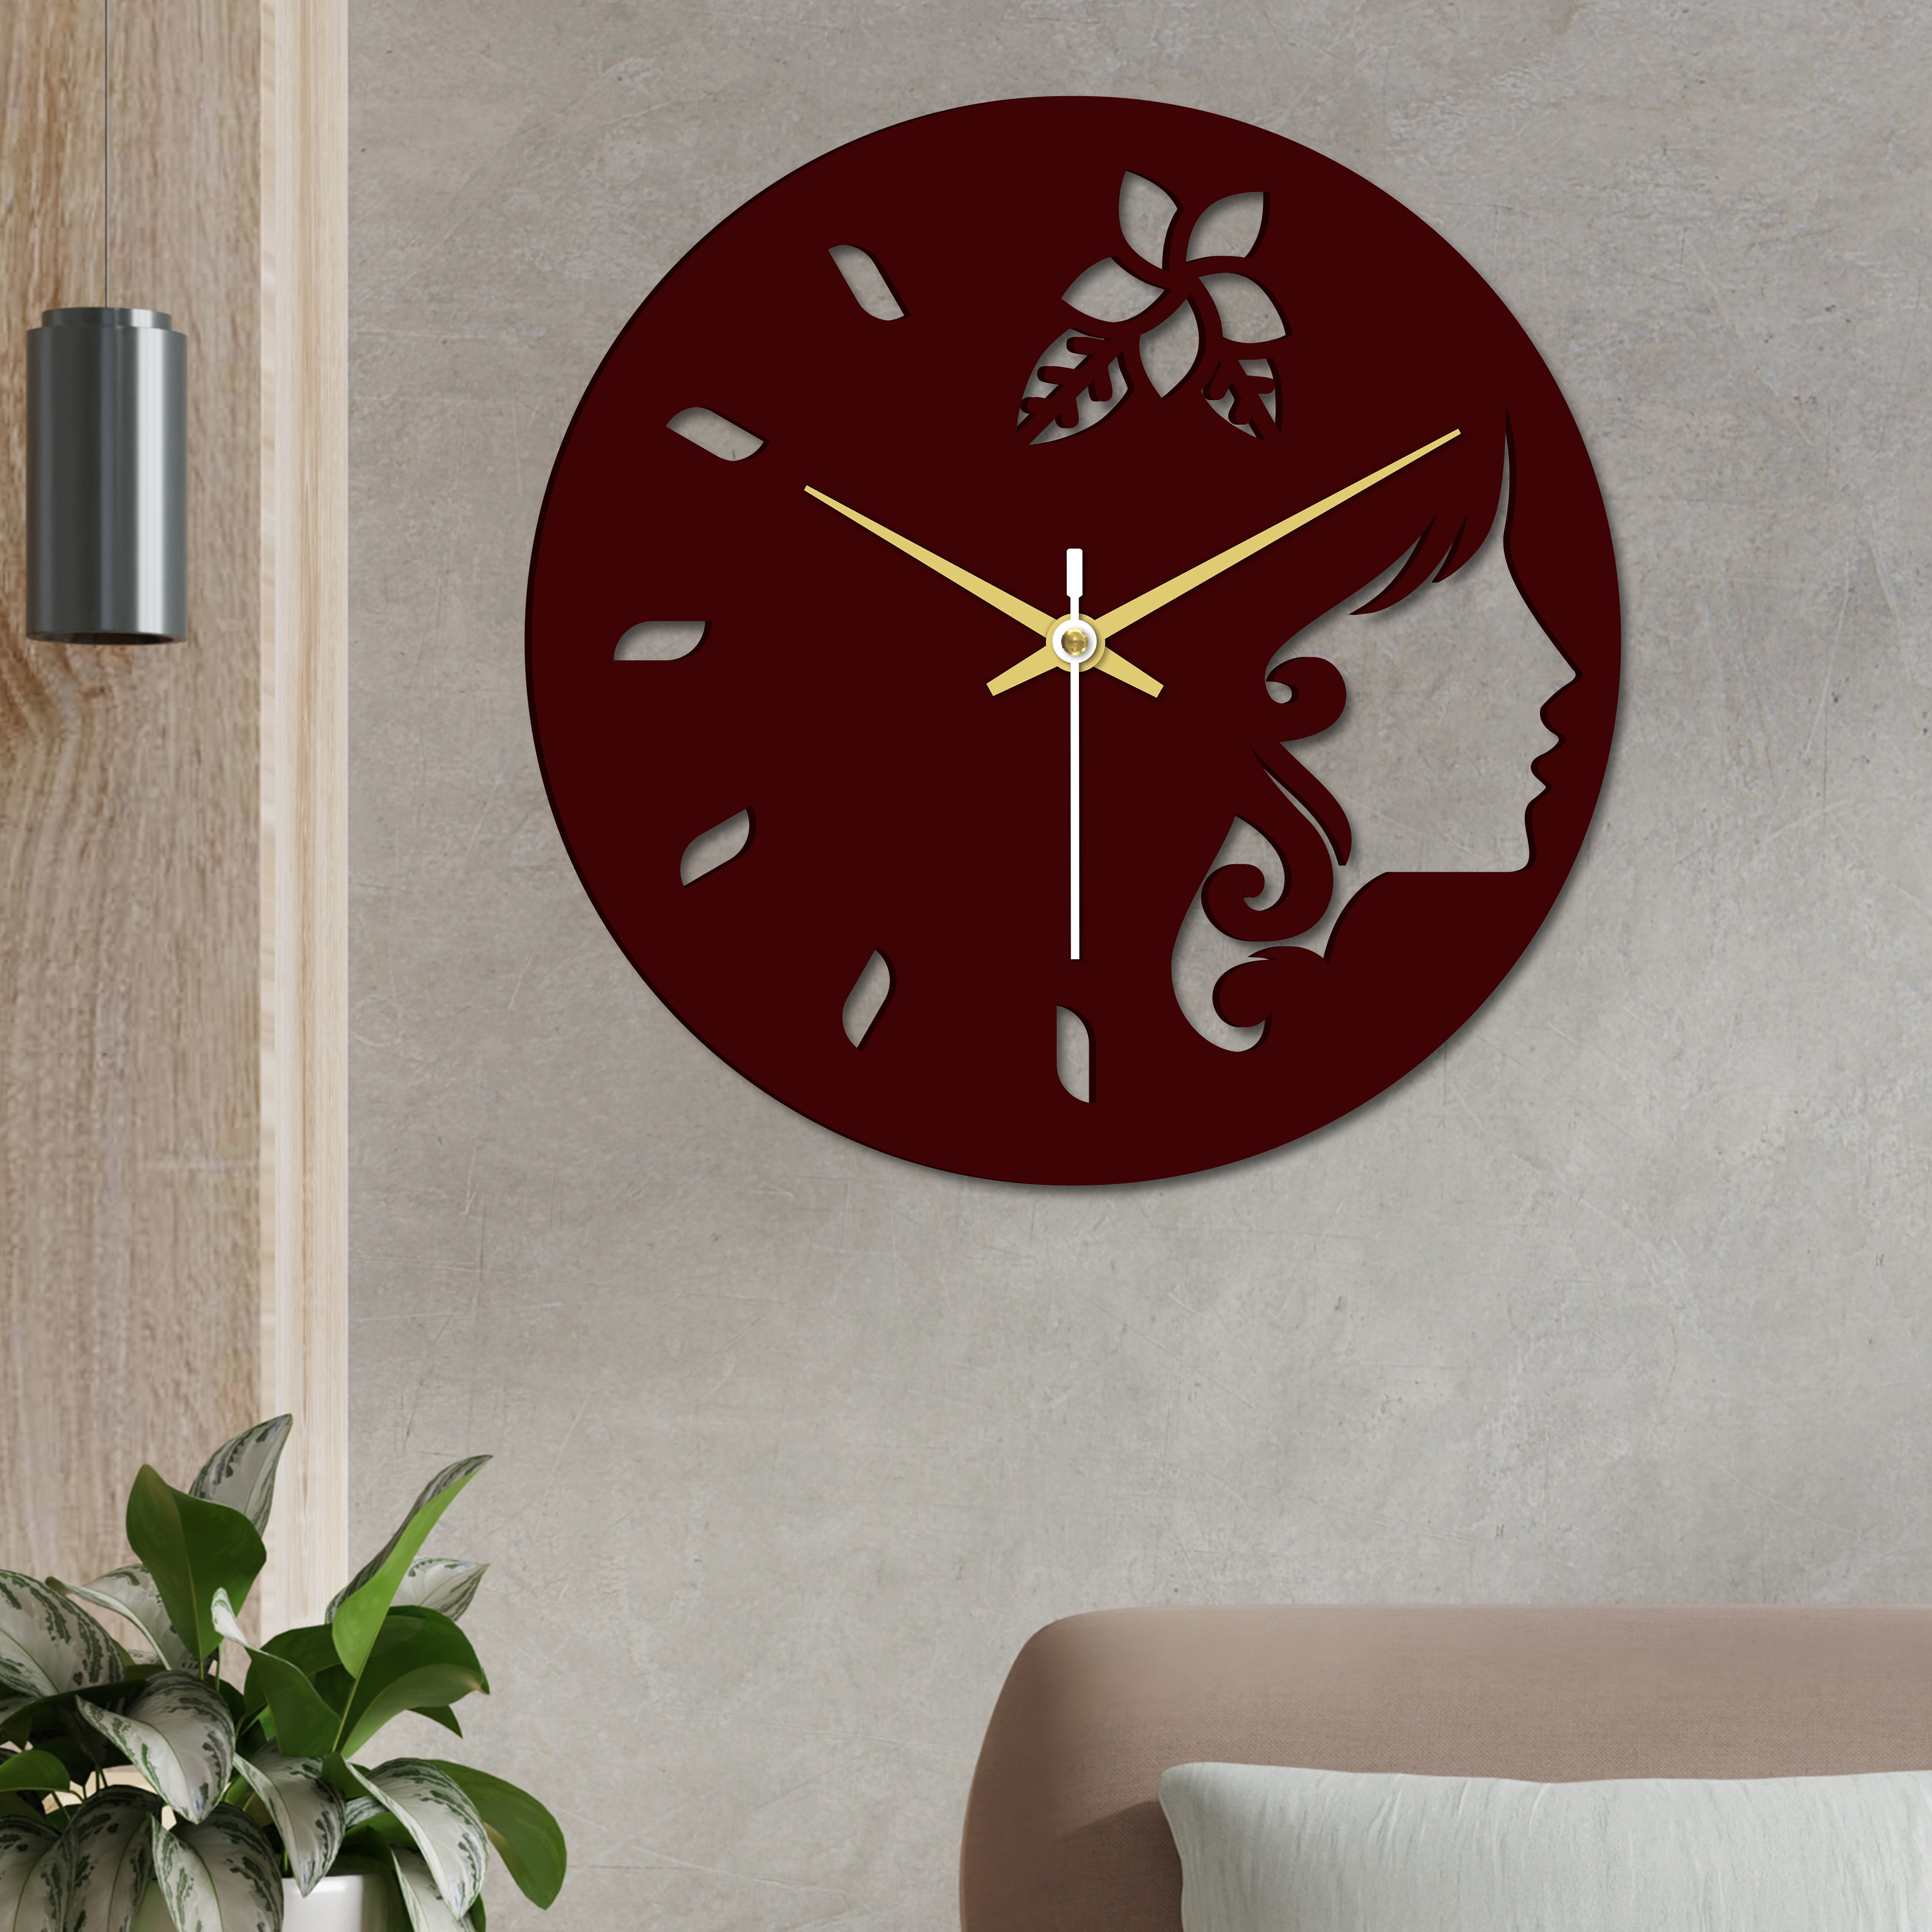 Girl Face in Wooden Wall Clock